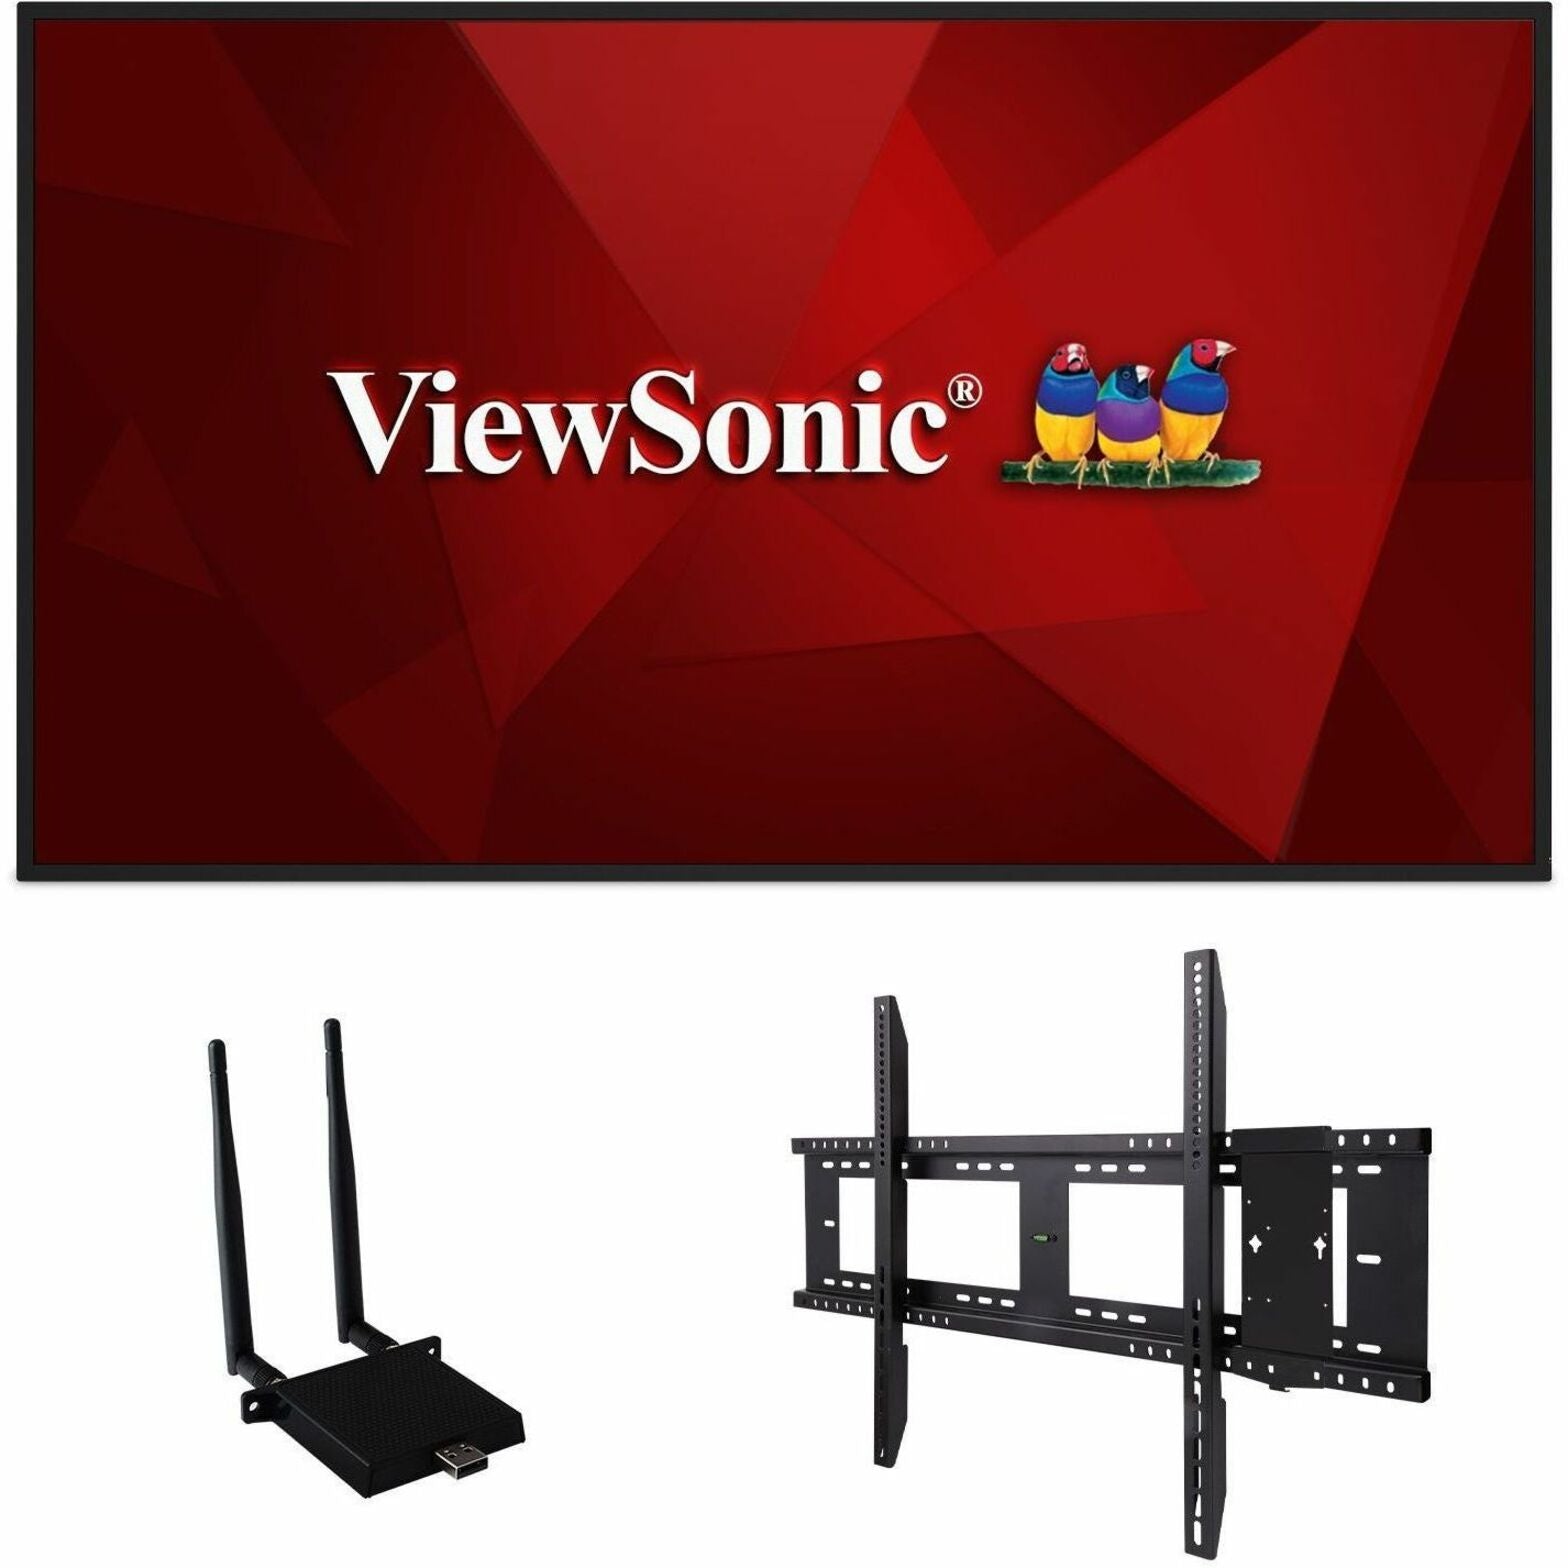 ViewSonic CDE8630-E1 Digital Signage Display - 4K, Integrated Software, WiFi Adapter, Fixed Wall Mount